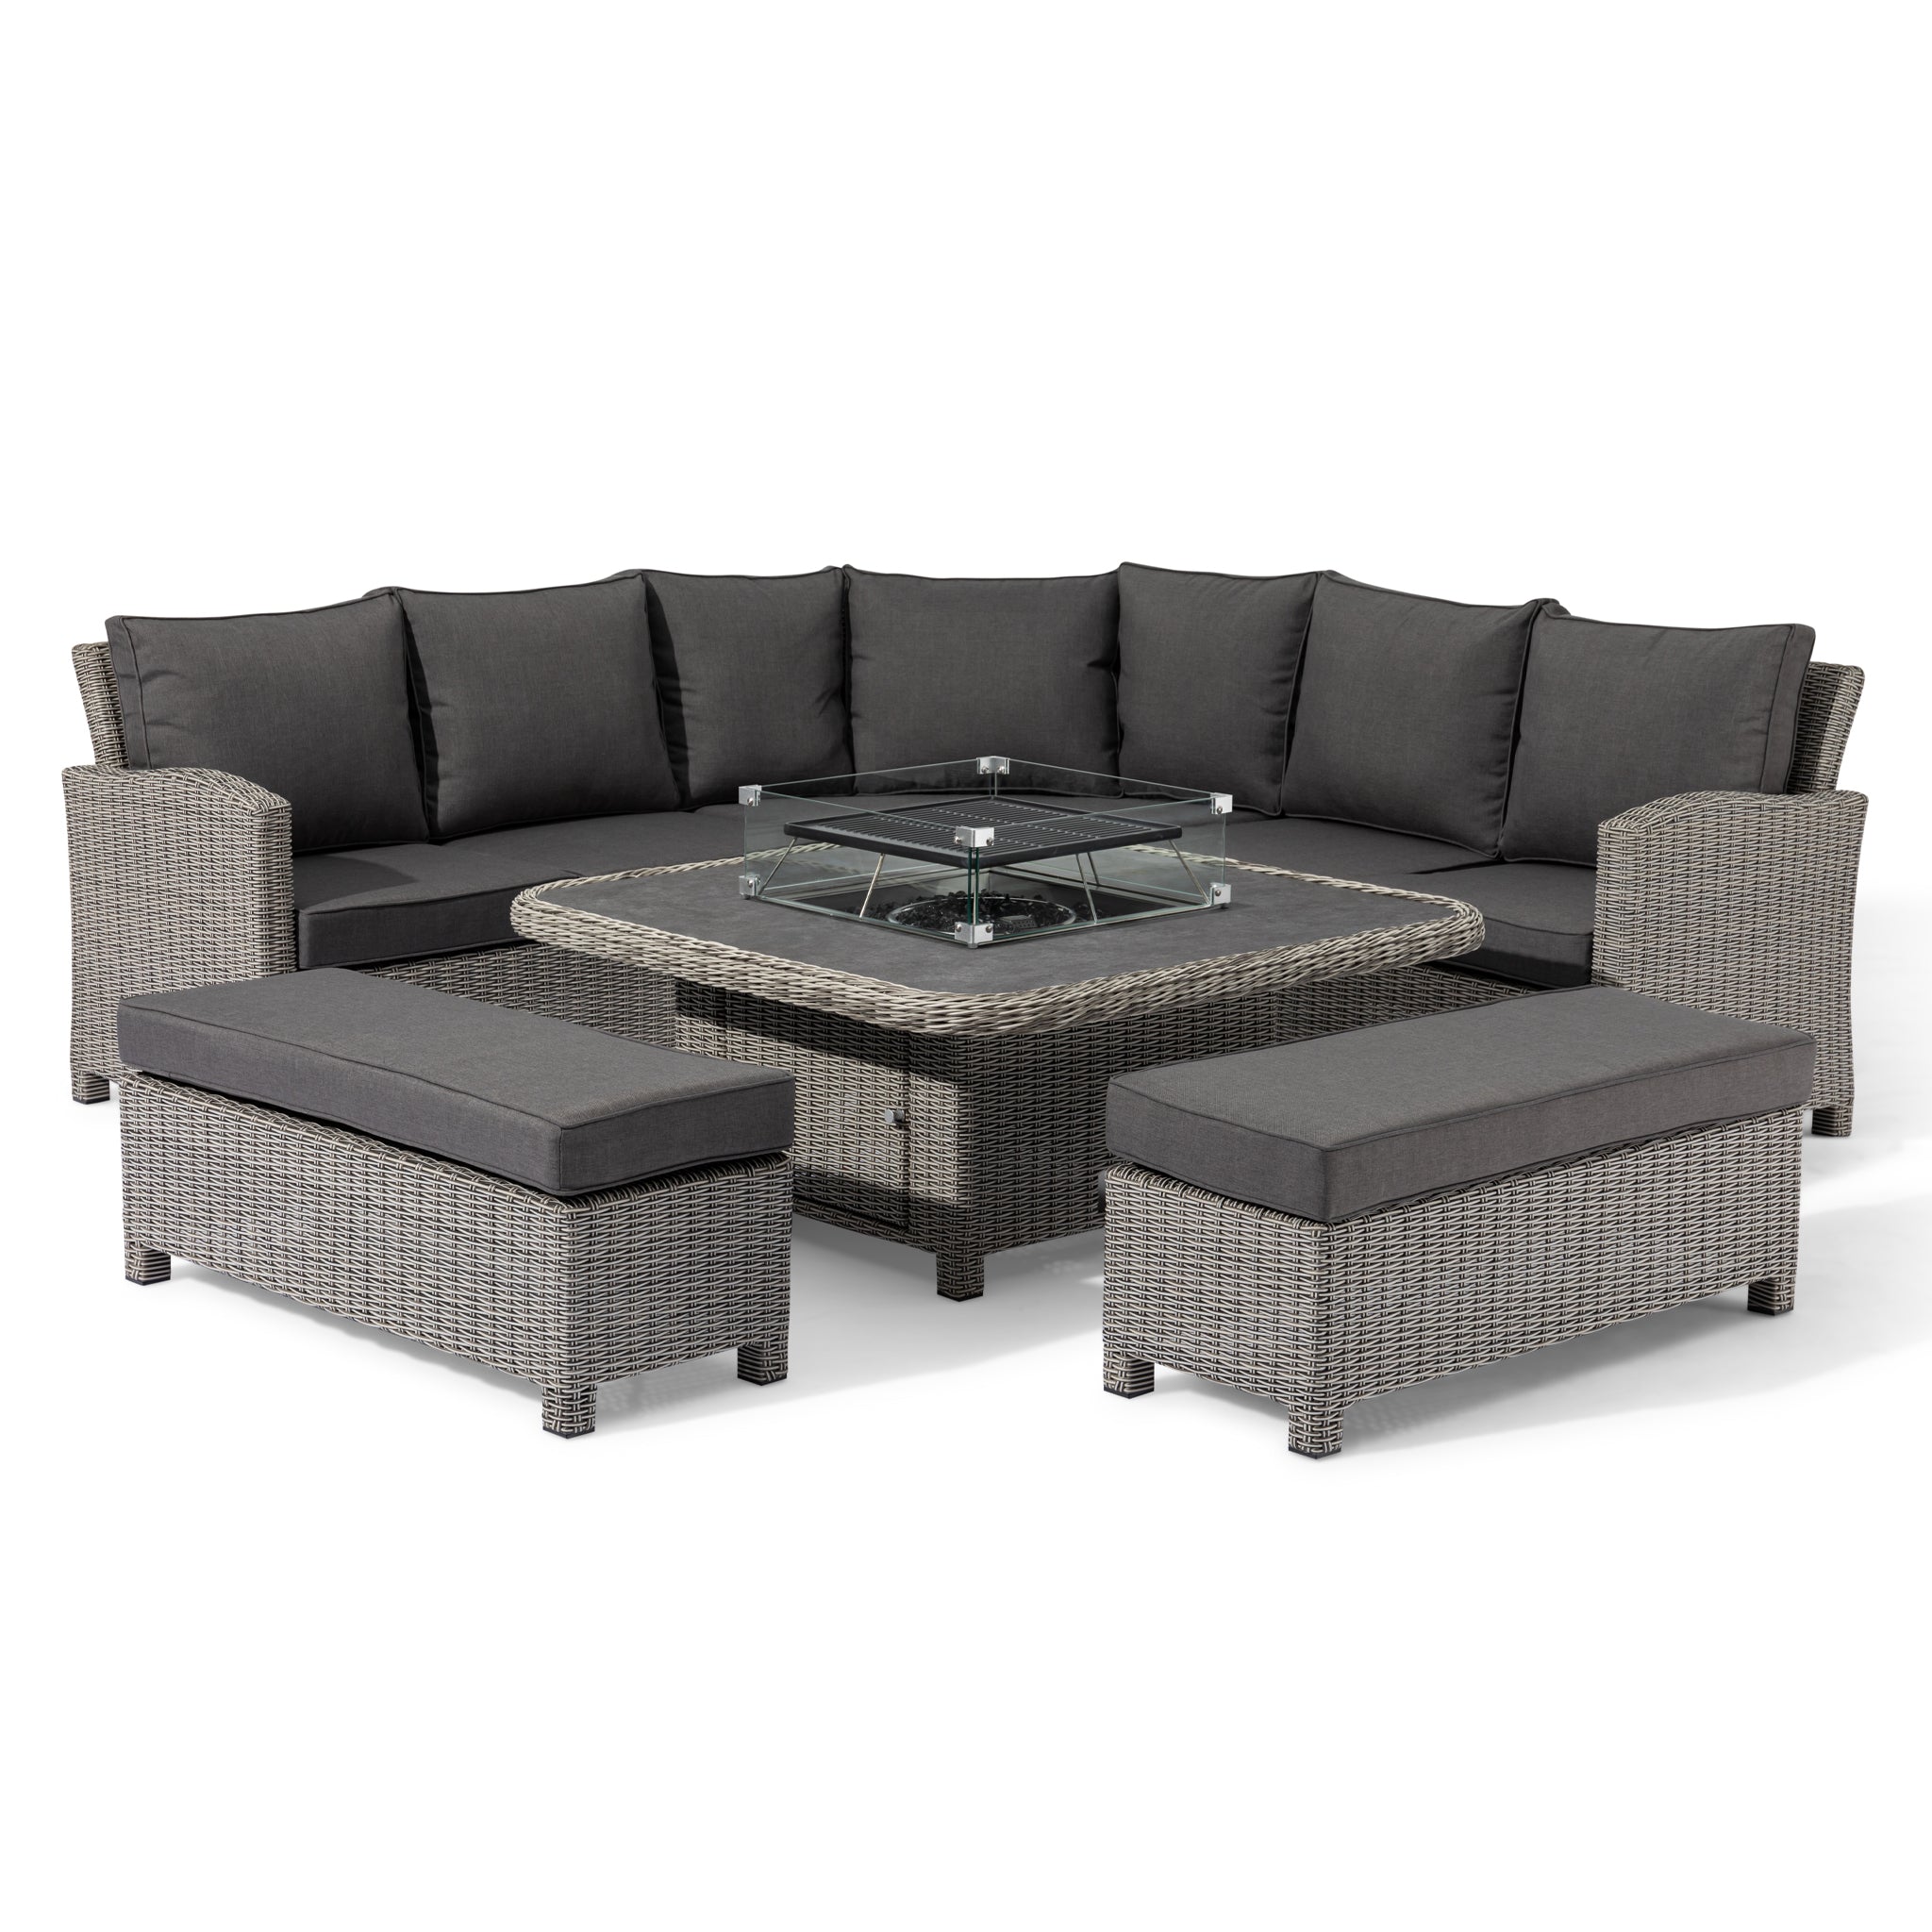 Santiago Deluxe Square Rattan Corner Dining Set with Rising Firepit Table in Grey